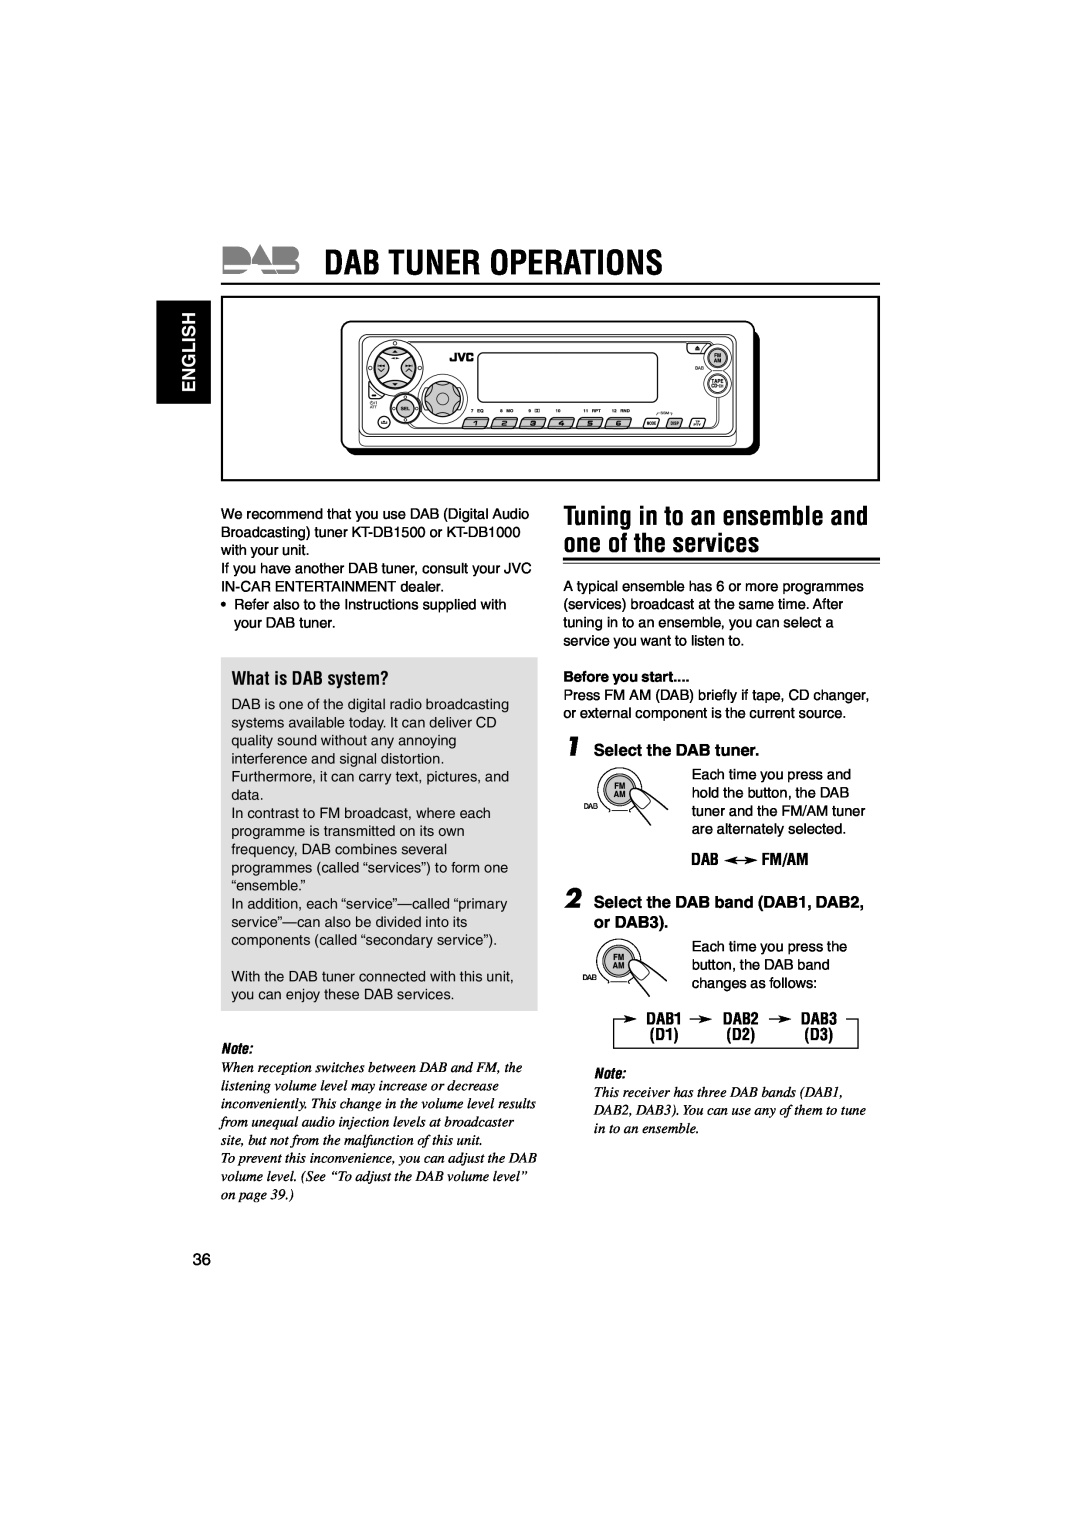 JVC KS-FX942R manual Dab Tuner Operations, Tuning in to an ensemble and one of the services, English, What is DAB system? 